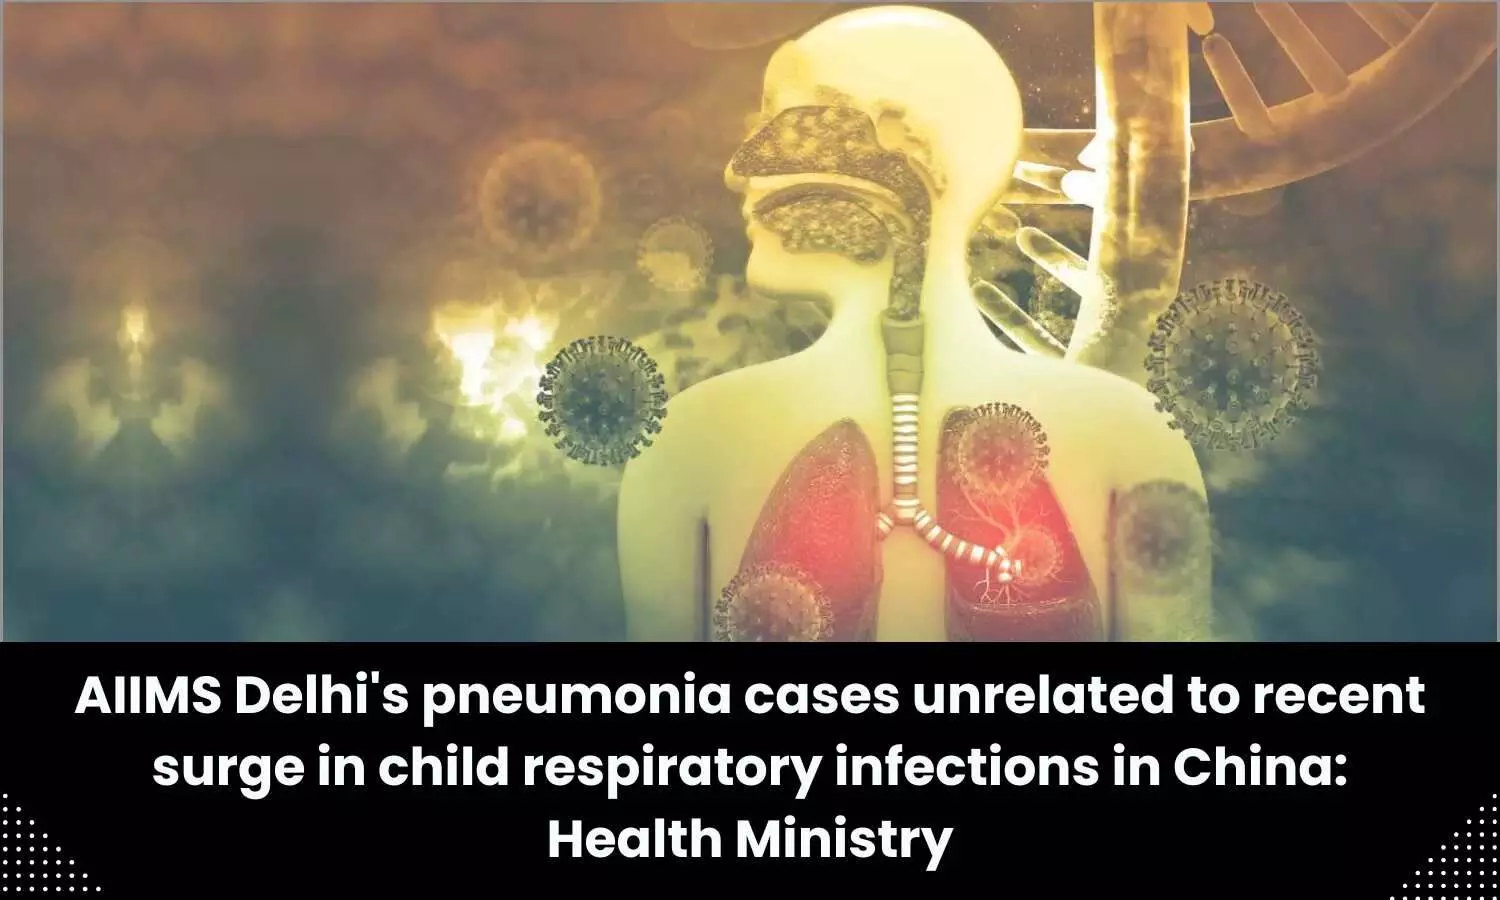 Govt refutes claims of detection of bacterial cases in AIIMS Delhi linked to recent surge in pneumonia in China